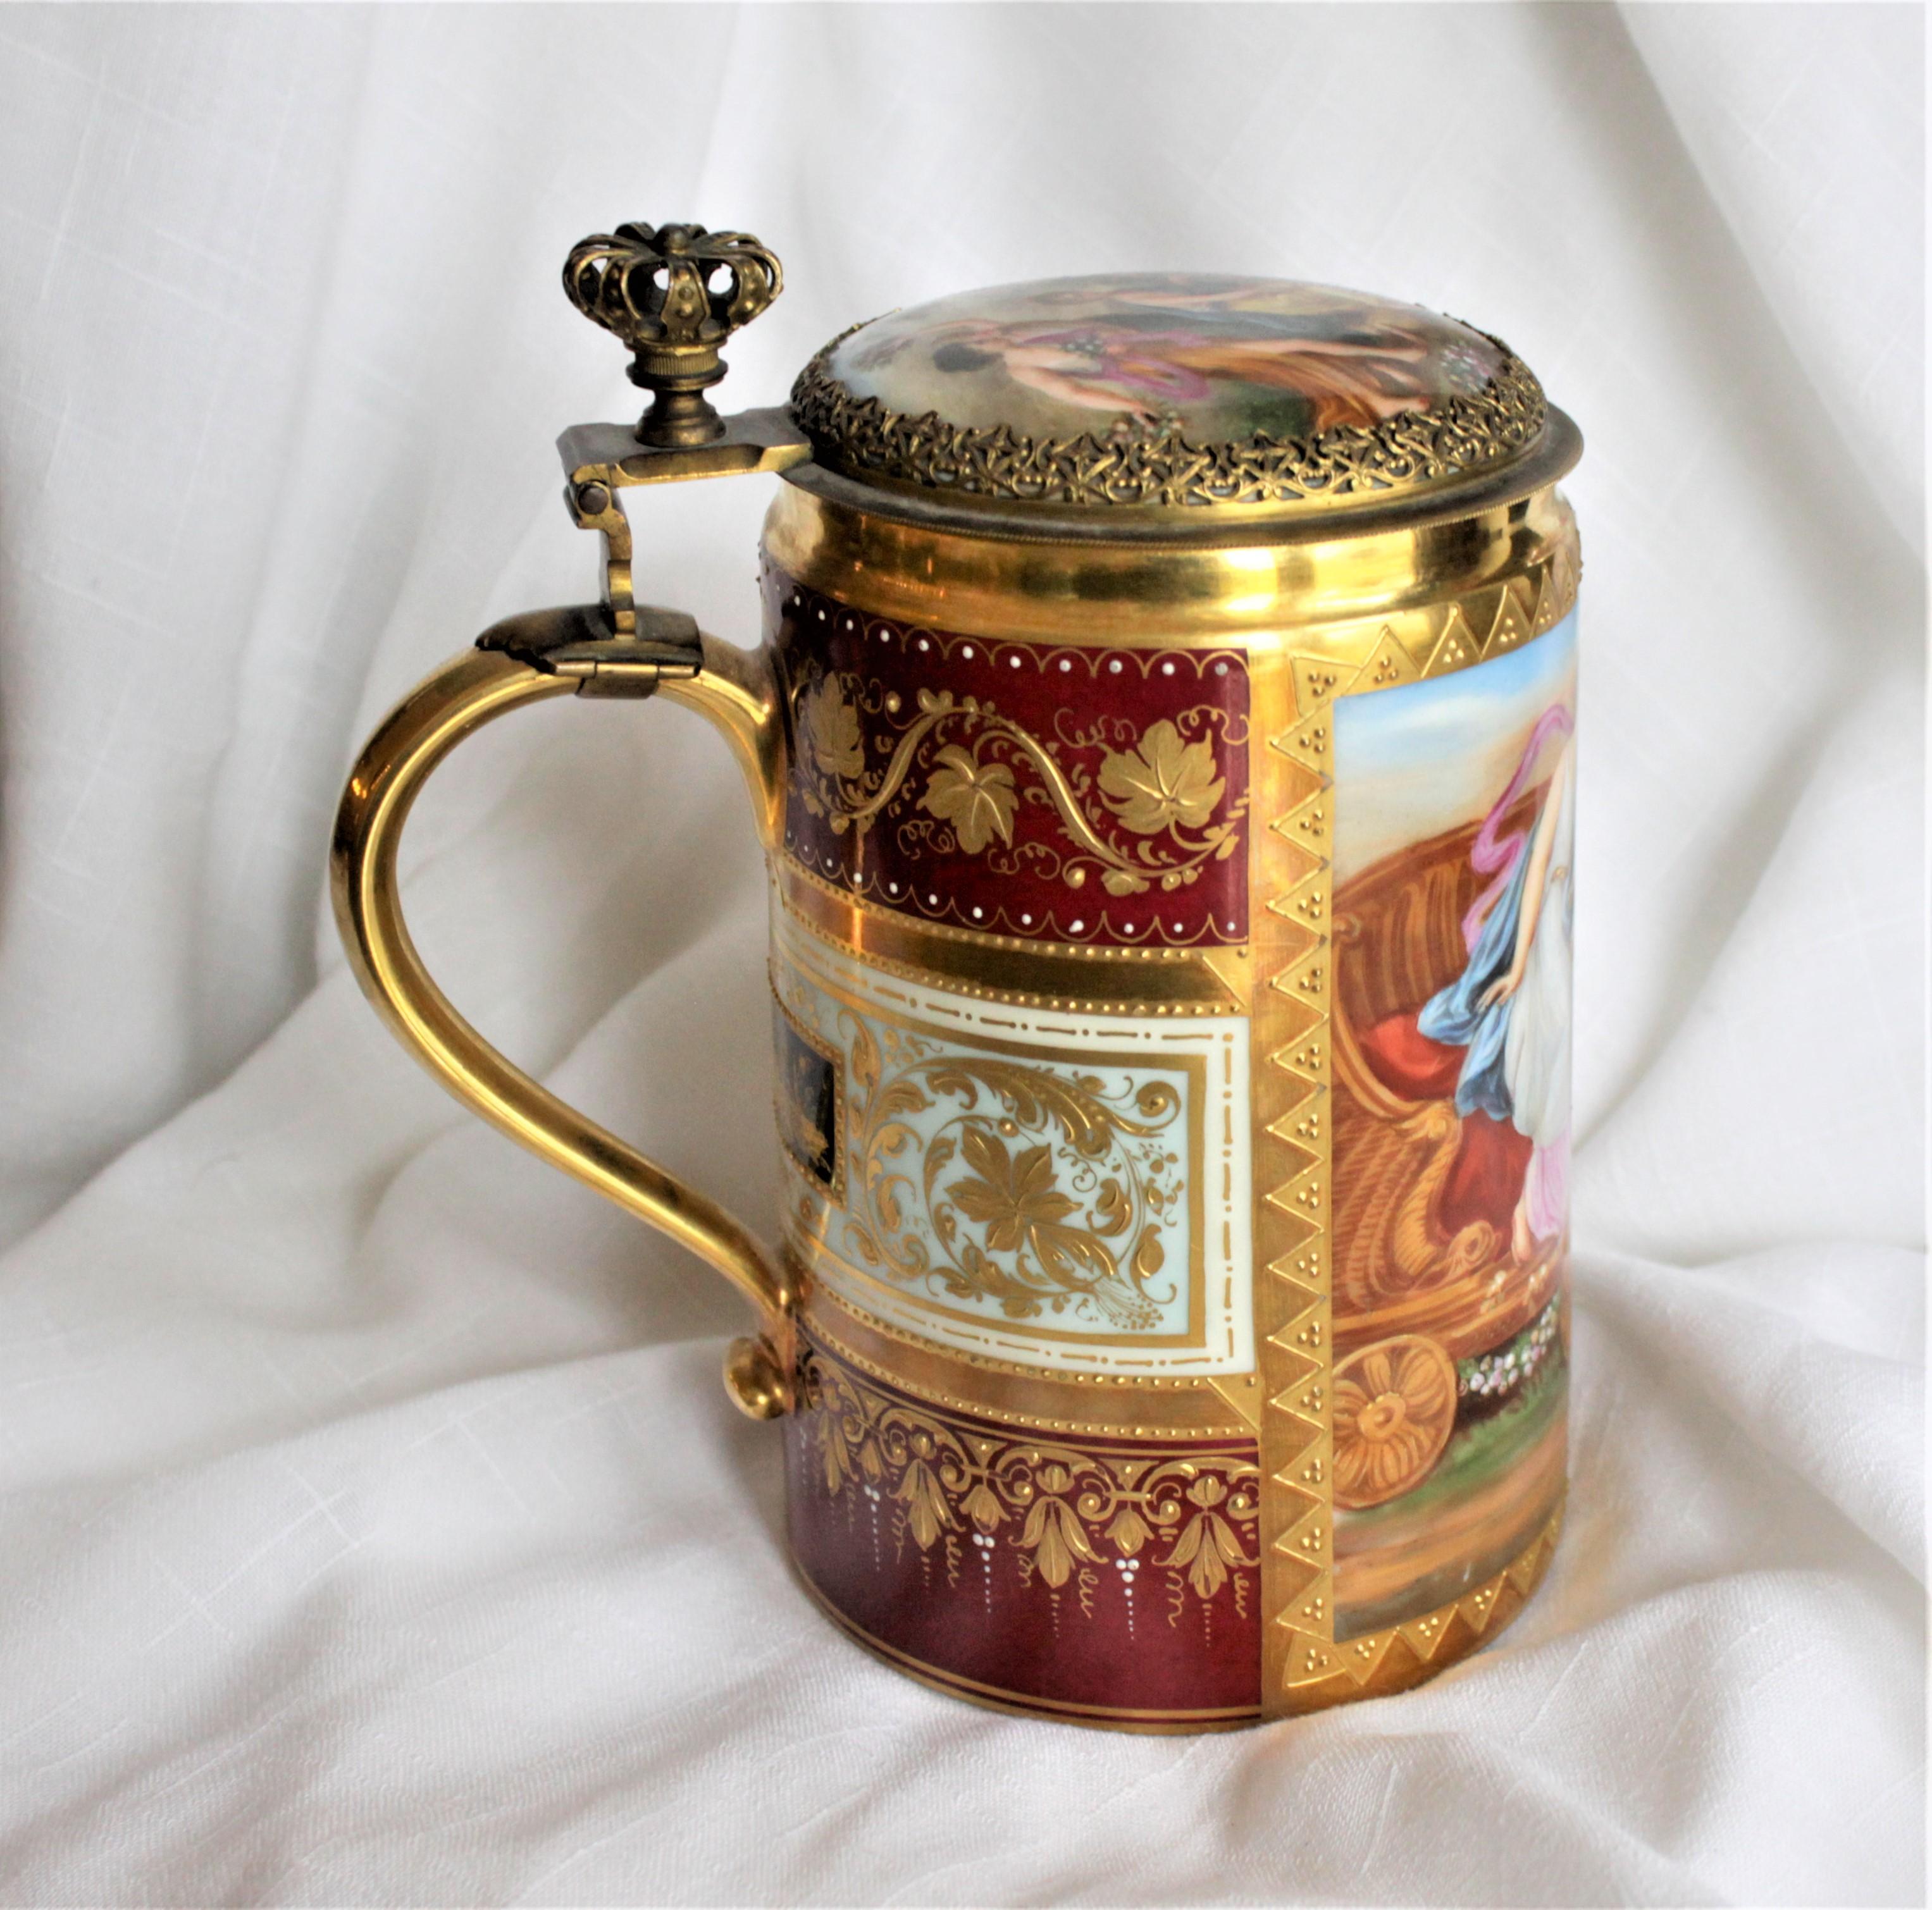 19th Century Antique Royal Vienna Styled Hand Painted Tankard or Stein with Bronze Mounts